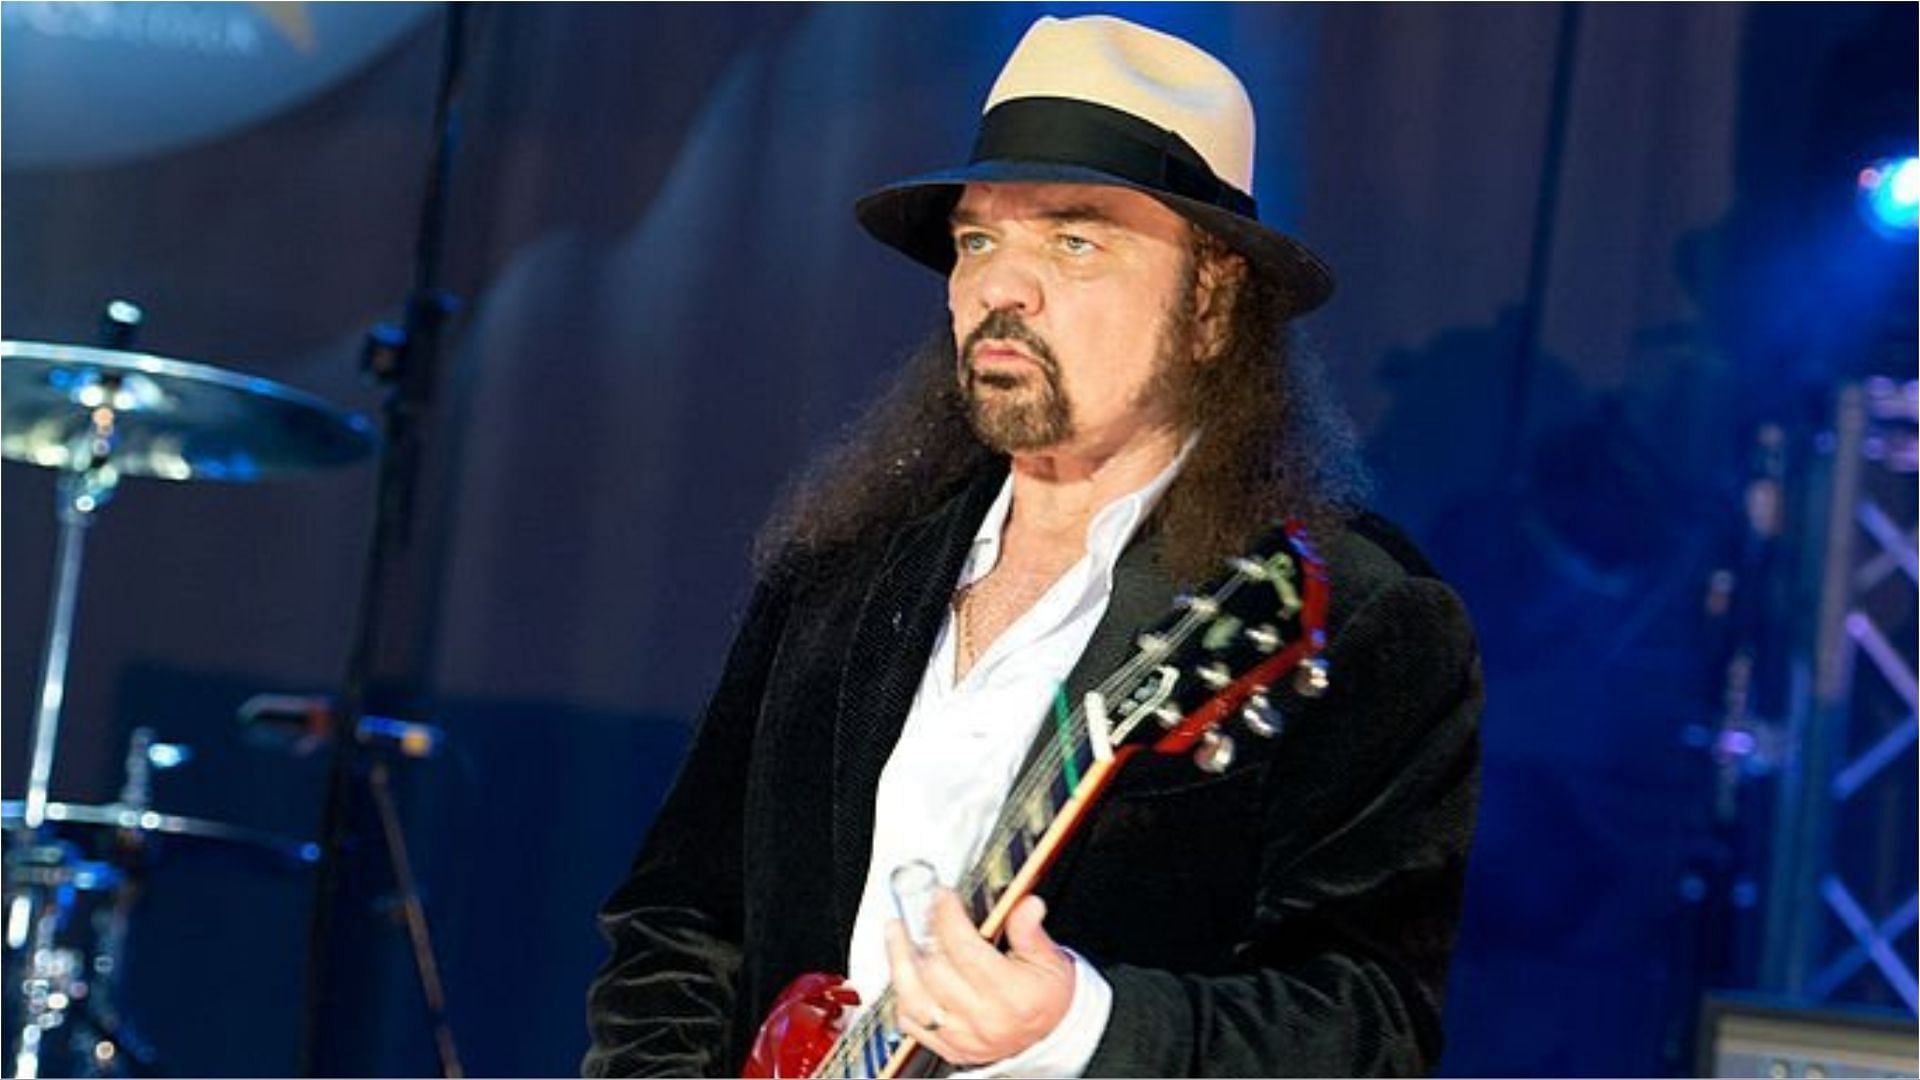 Gary Rossington was 71 years old at the time of death (Image via Kevin Nixon/Getty Images)